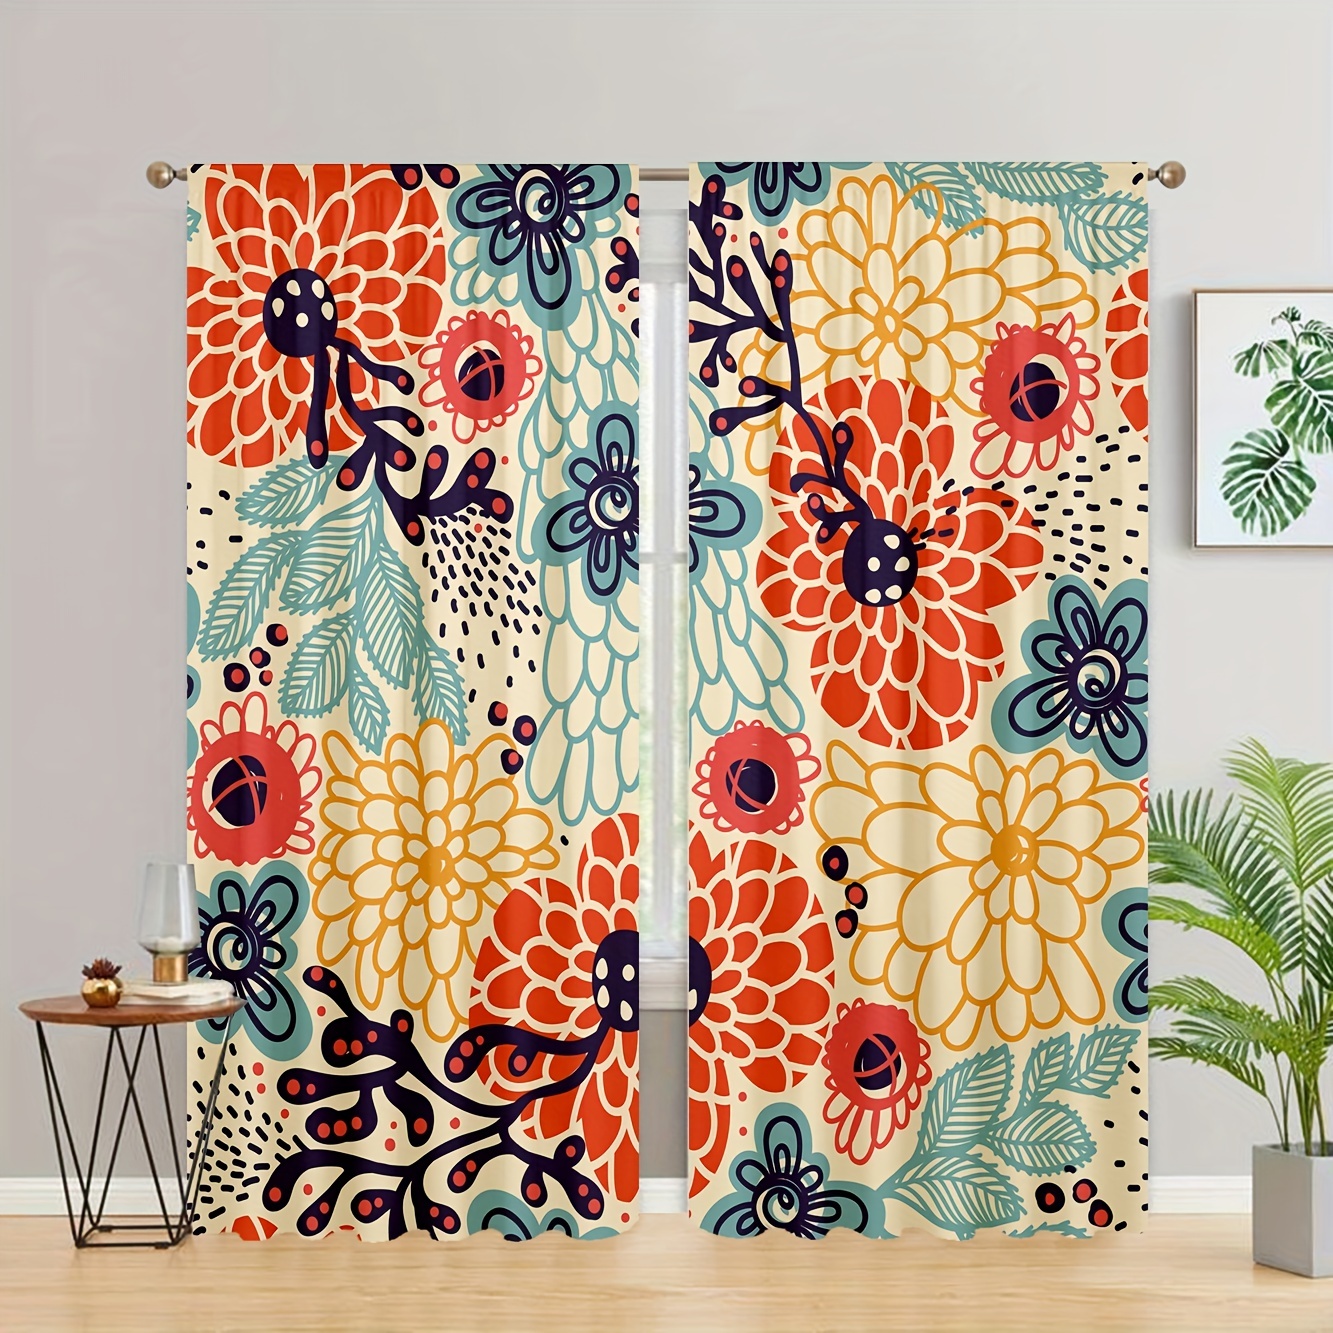 

2pcs Aesthetic Retro Flower Print Curtain For Bedroom, Office, Kitchen, Living Room, And Study - Rod Pocket Window Treatment For Home Decor And Room Decoration